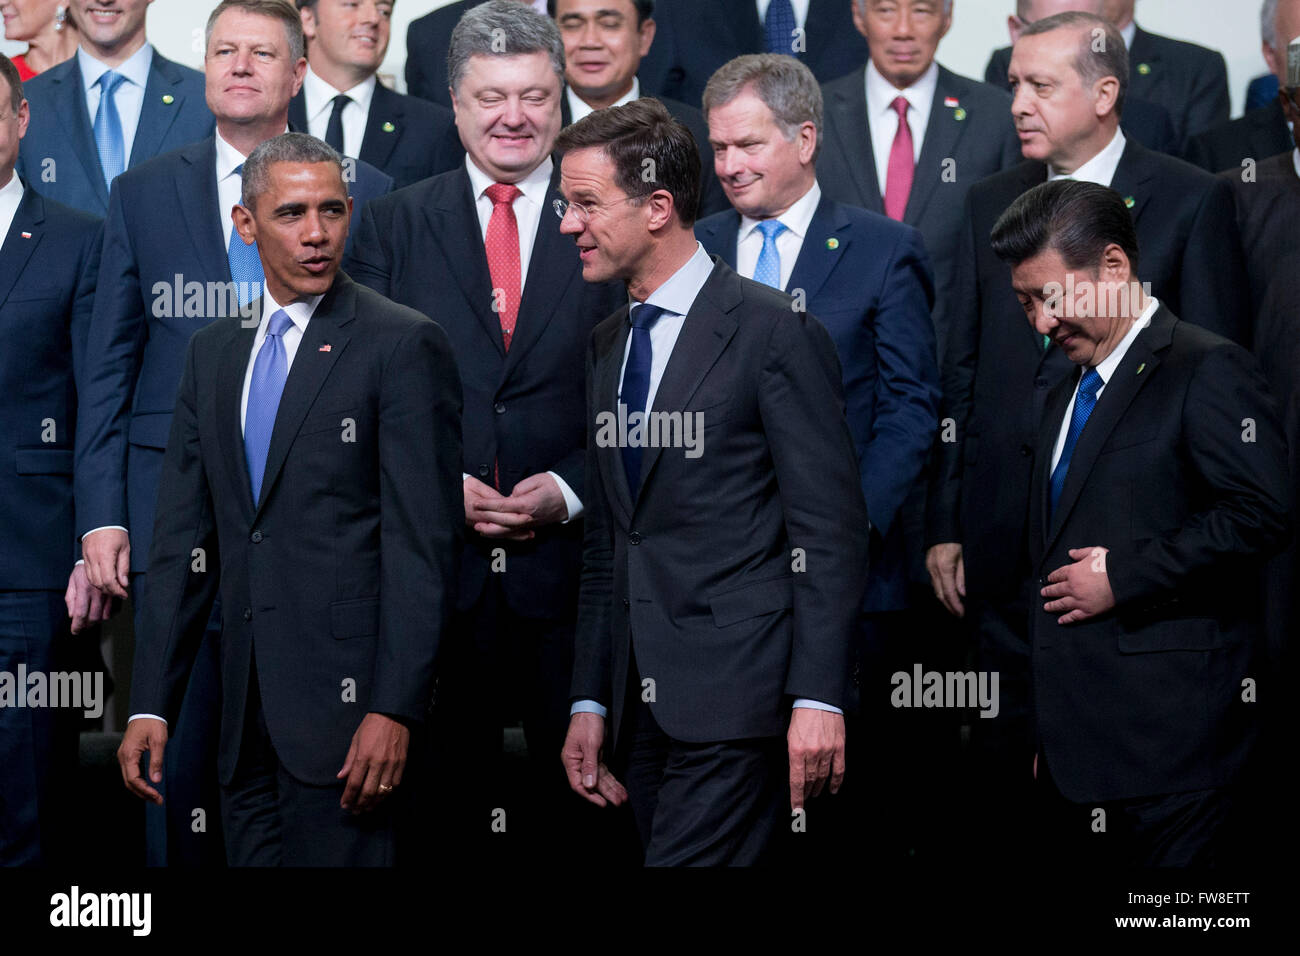 United States President Barack Obama, left, talks to Mark Rutte, Dutch prime minister, as they walk out of a family photo with Xi Jinping, China's president, right, at the Nuclear Security Summit in Washington, DC, U.S., on Friday, April 1, 2016. After a spate of terrorist attacks from Europe to Africa, Obama is rallying international support during the summit for an effort to keep Islamic State and similar groups from obtaining nuclear material and other weapons of mass destruction. Credit: Andrew Harrer/Pool via CNP - NO WIRE SERVICE - Stock Photo